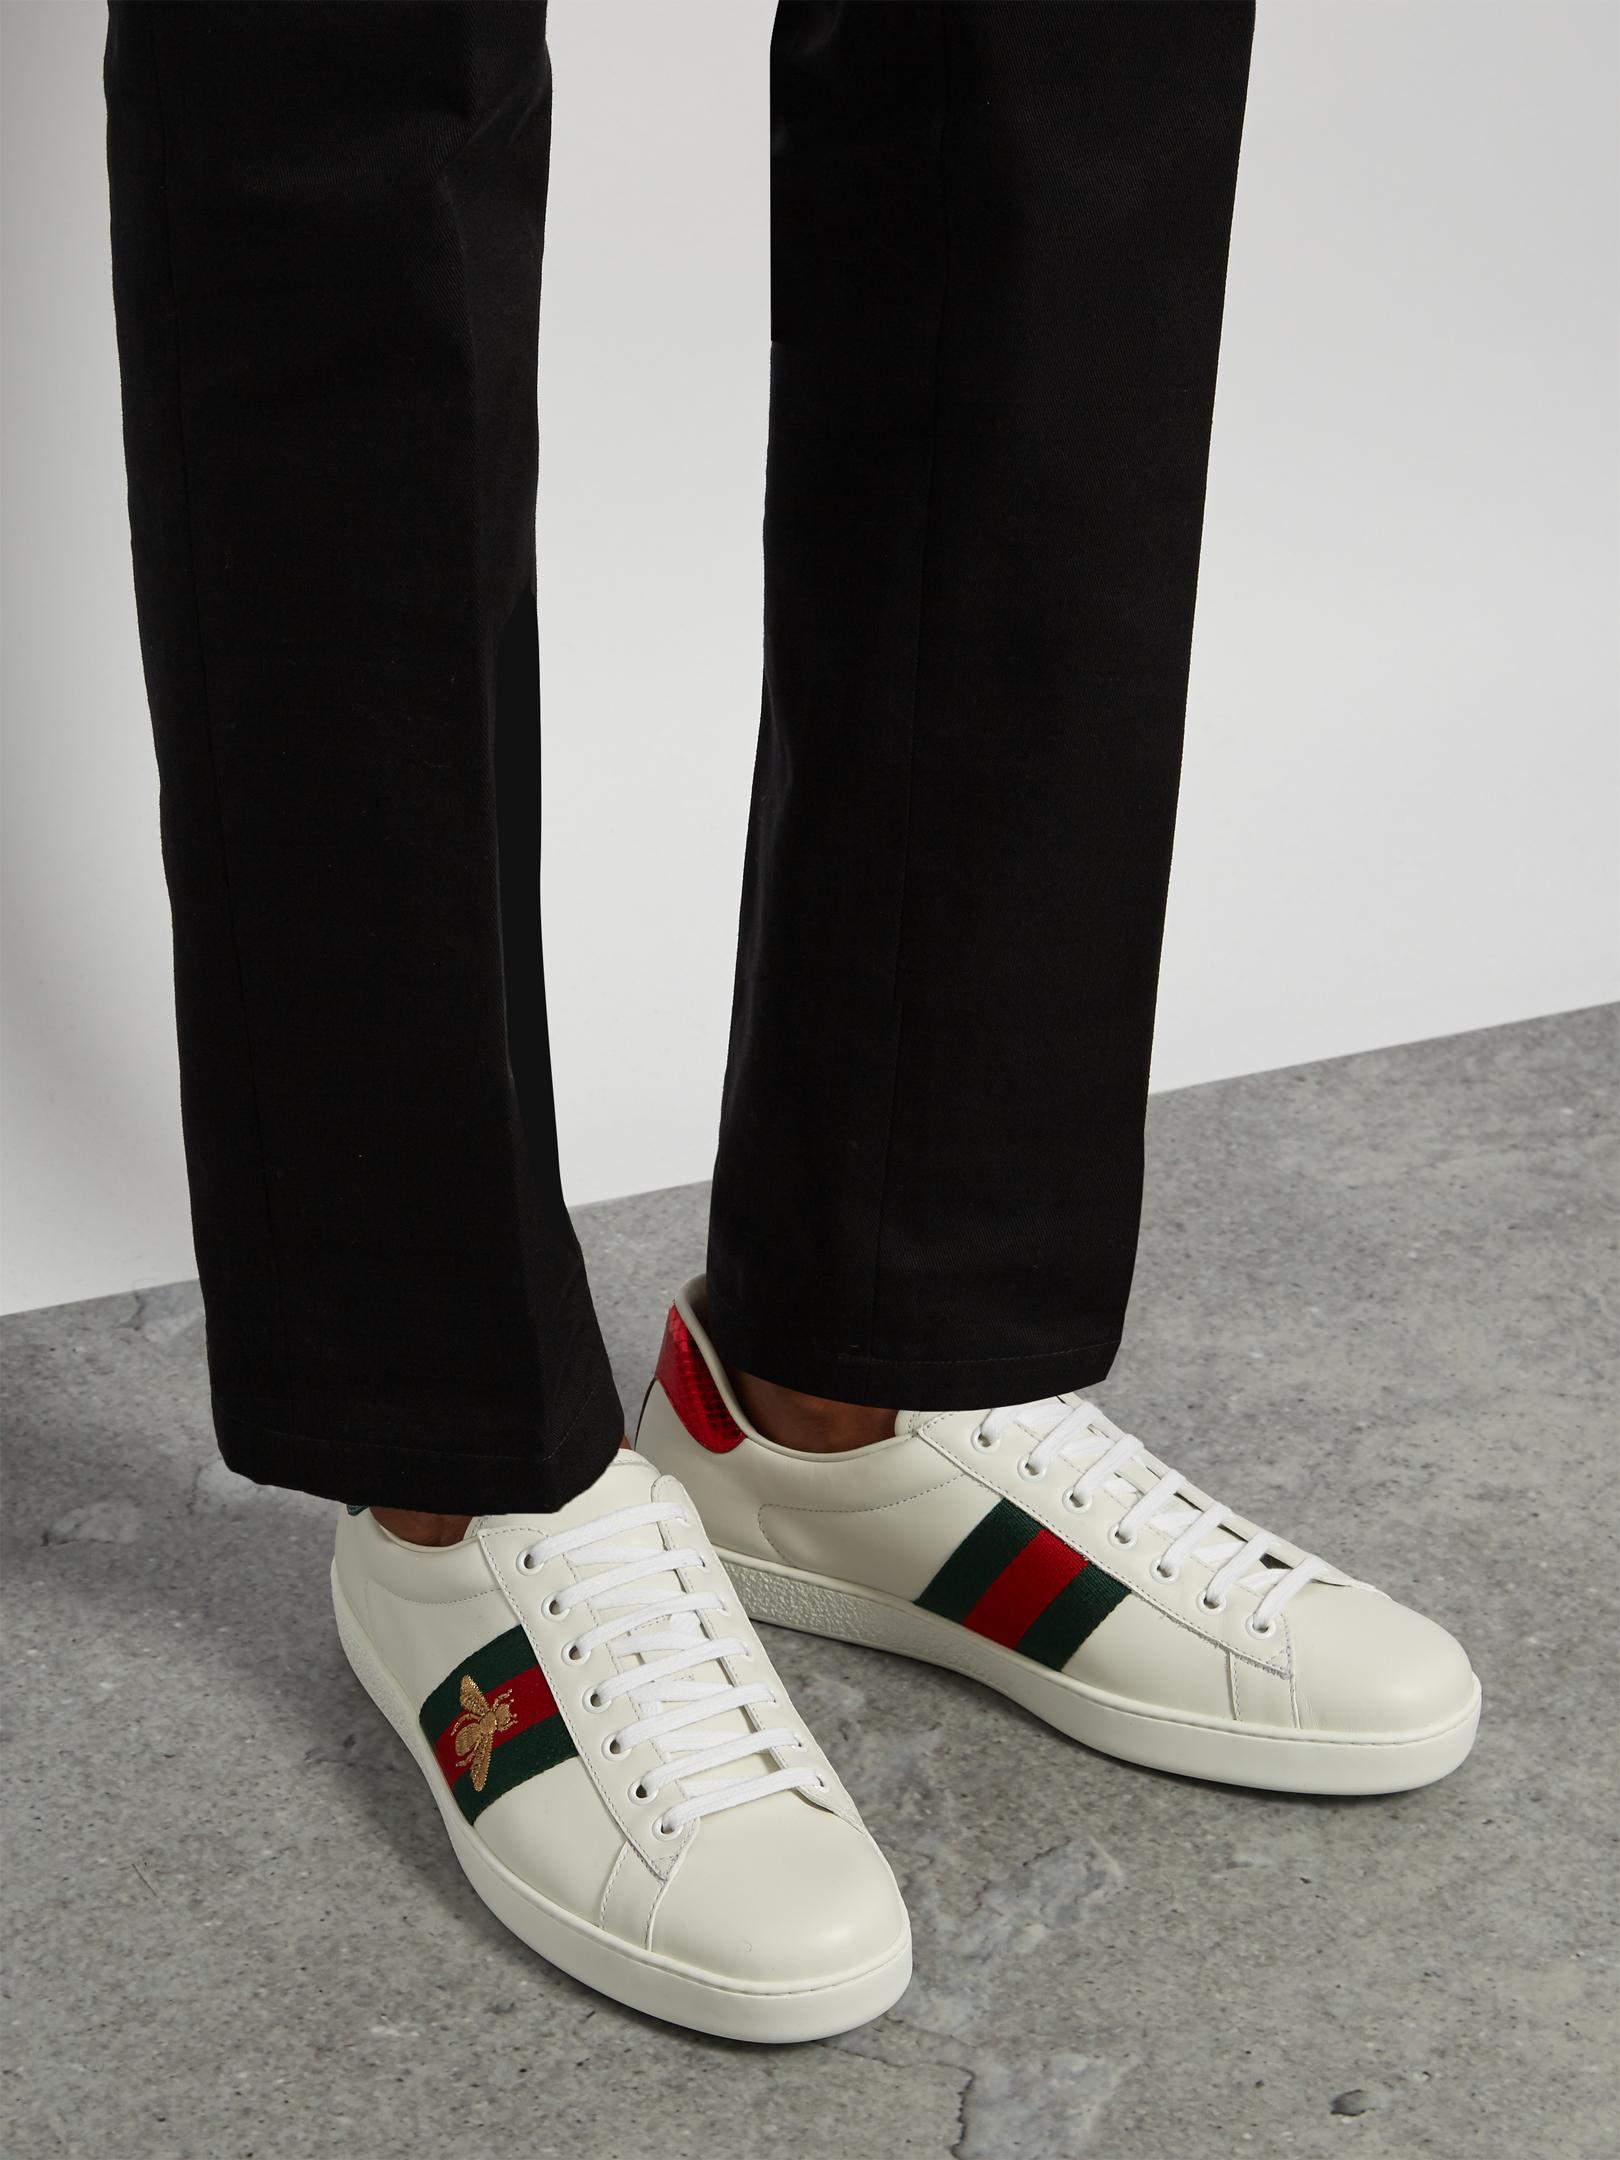 gucci ace mens trainers,OFF 73%,nalan 